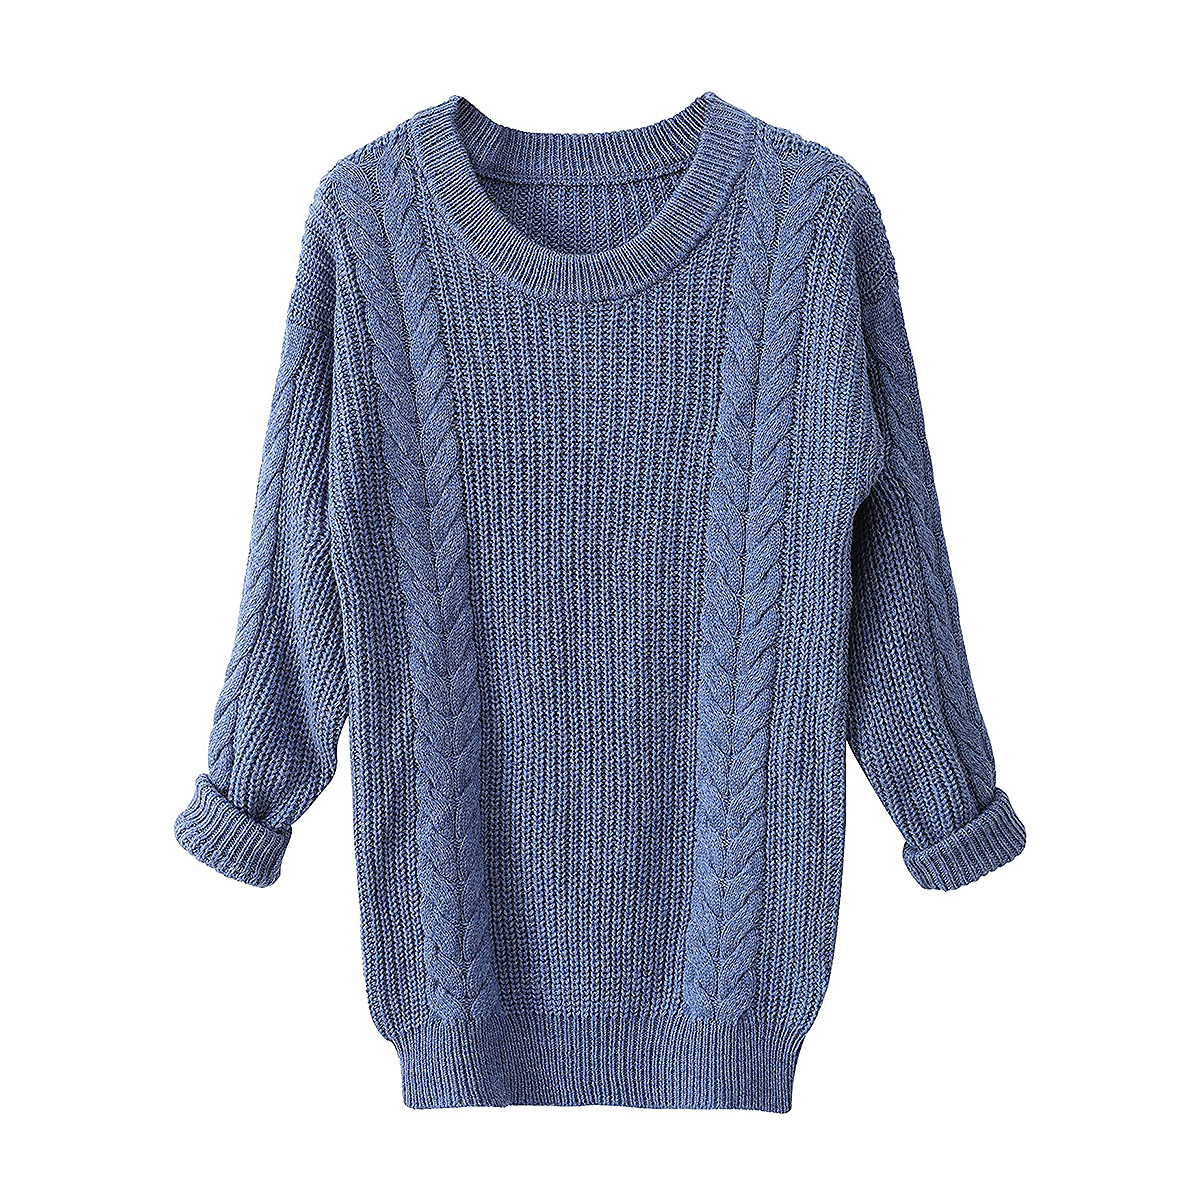 LINY XIN Slouchy Tunic Sweater’s Cashmere Blend Is a Dream | Us Weekly